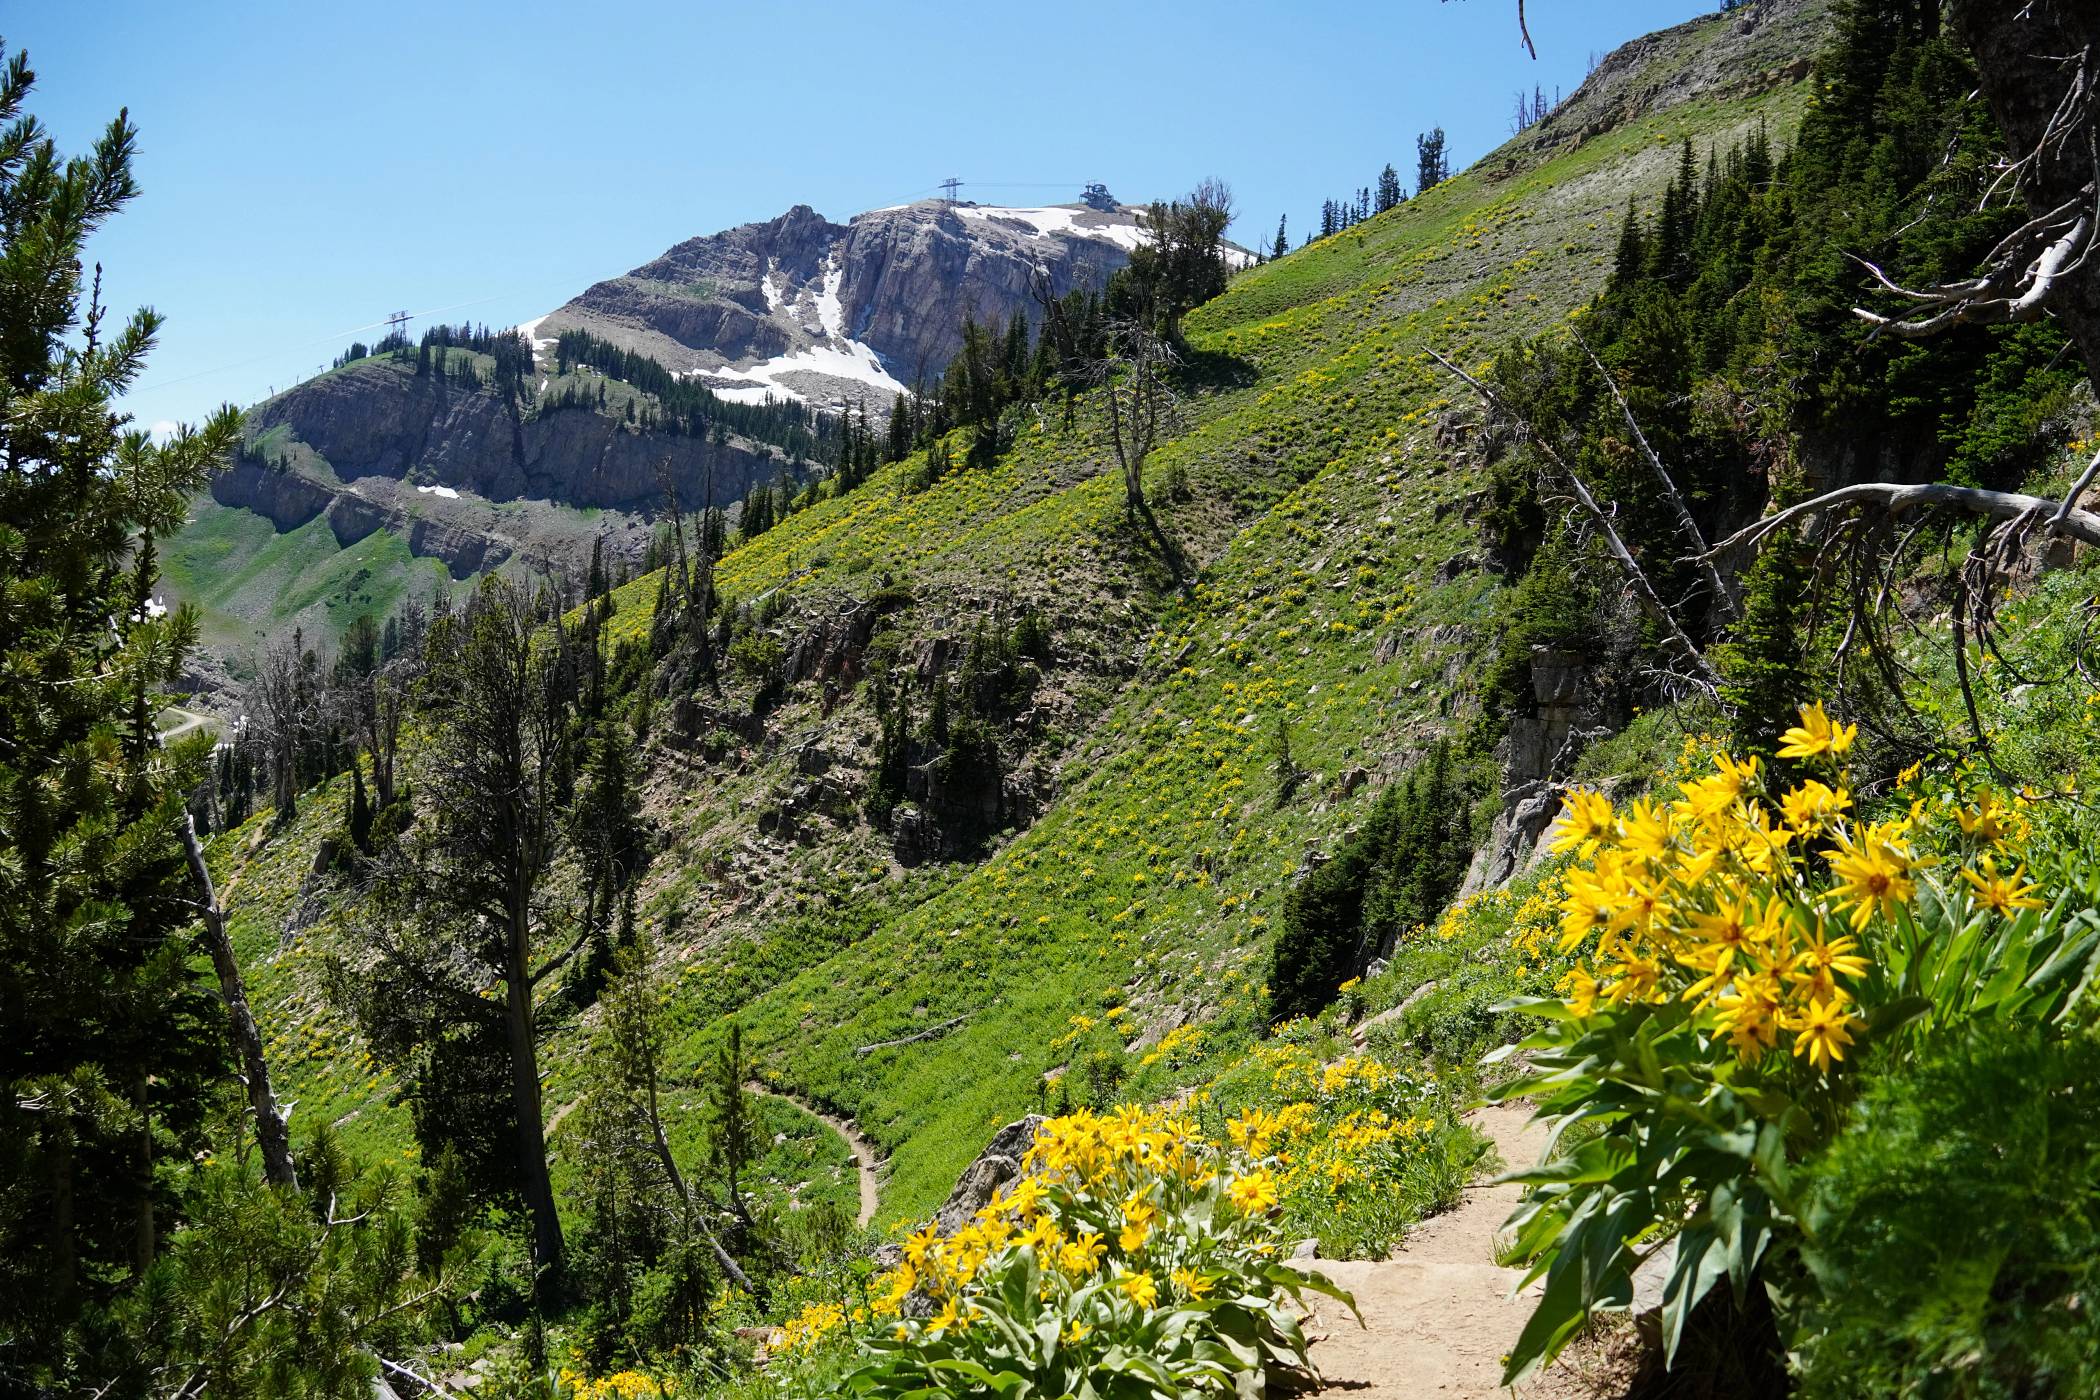 A section of Casper Ridge Loop with flowers and a view